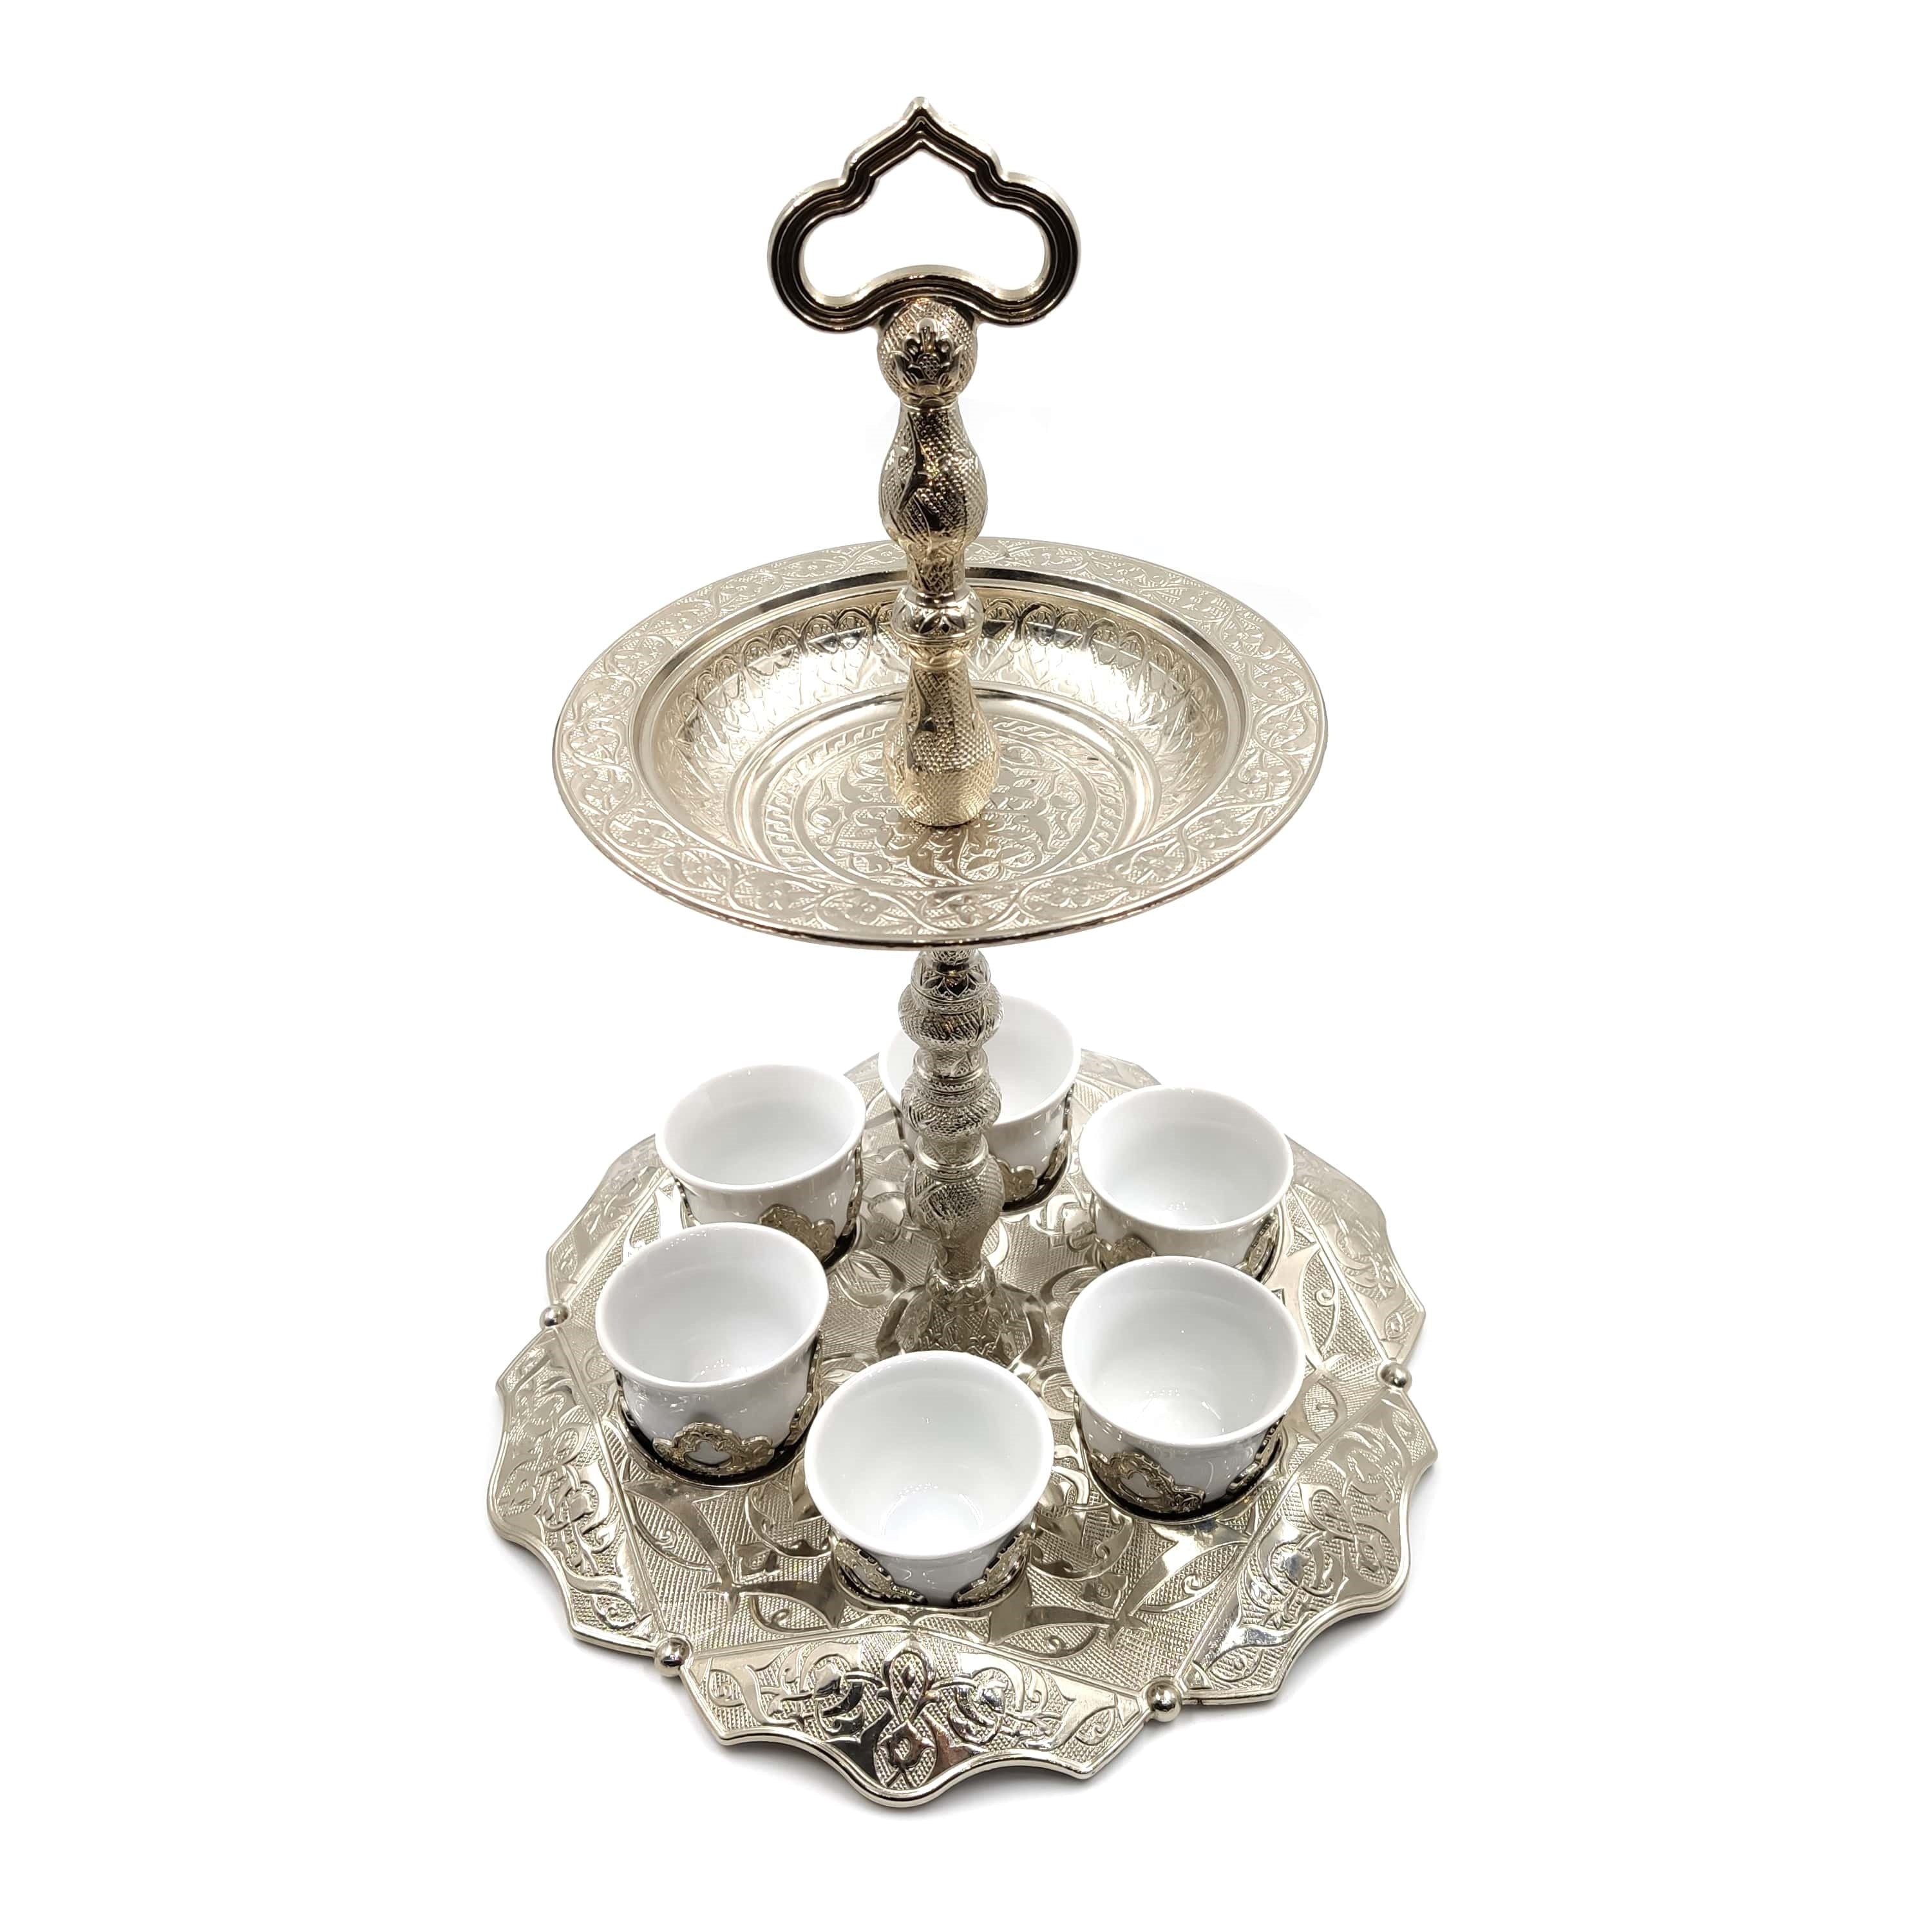 Turkish Silver Plated Coffee Set Mırra, arabic Coffee Serving Cups Set Two Tier Cake Stand Afternoon Tea Wedding Plates Party